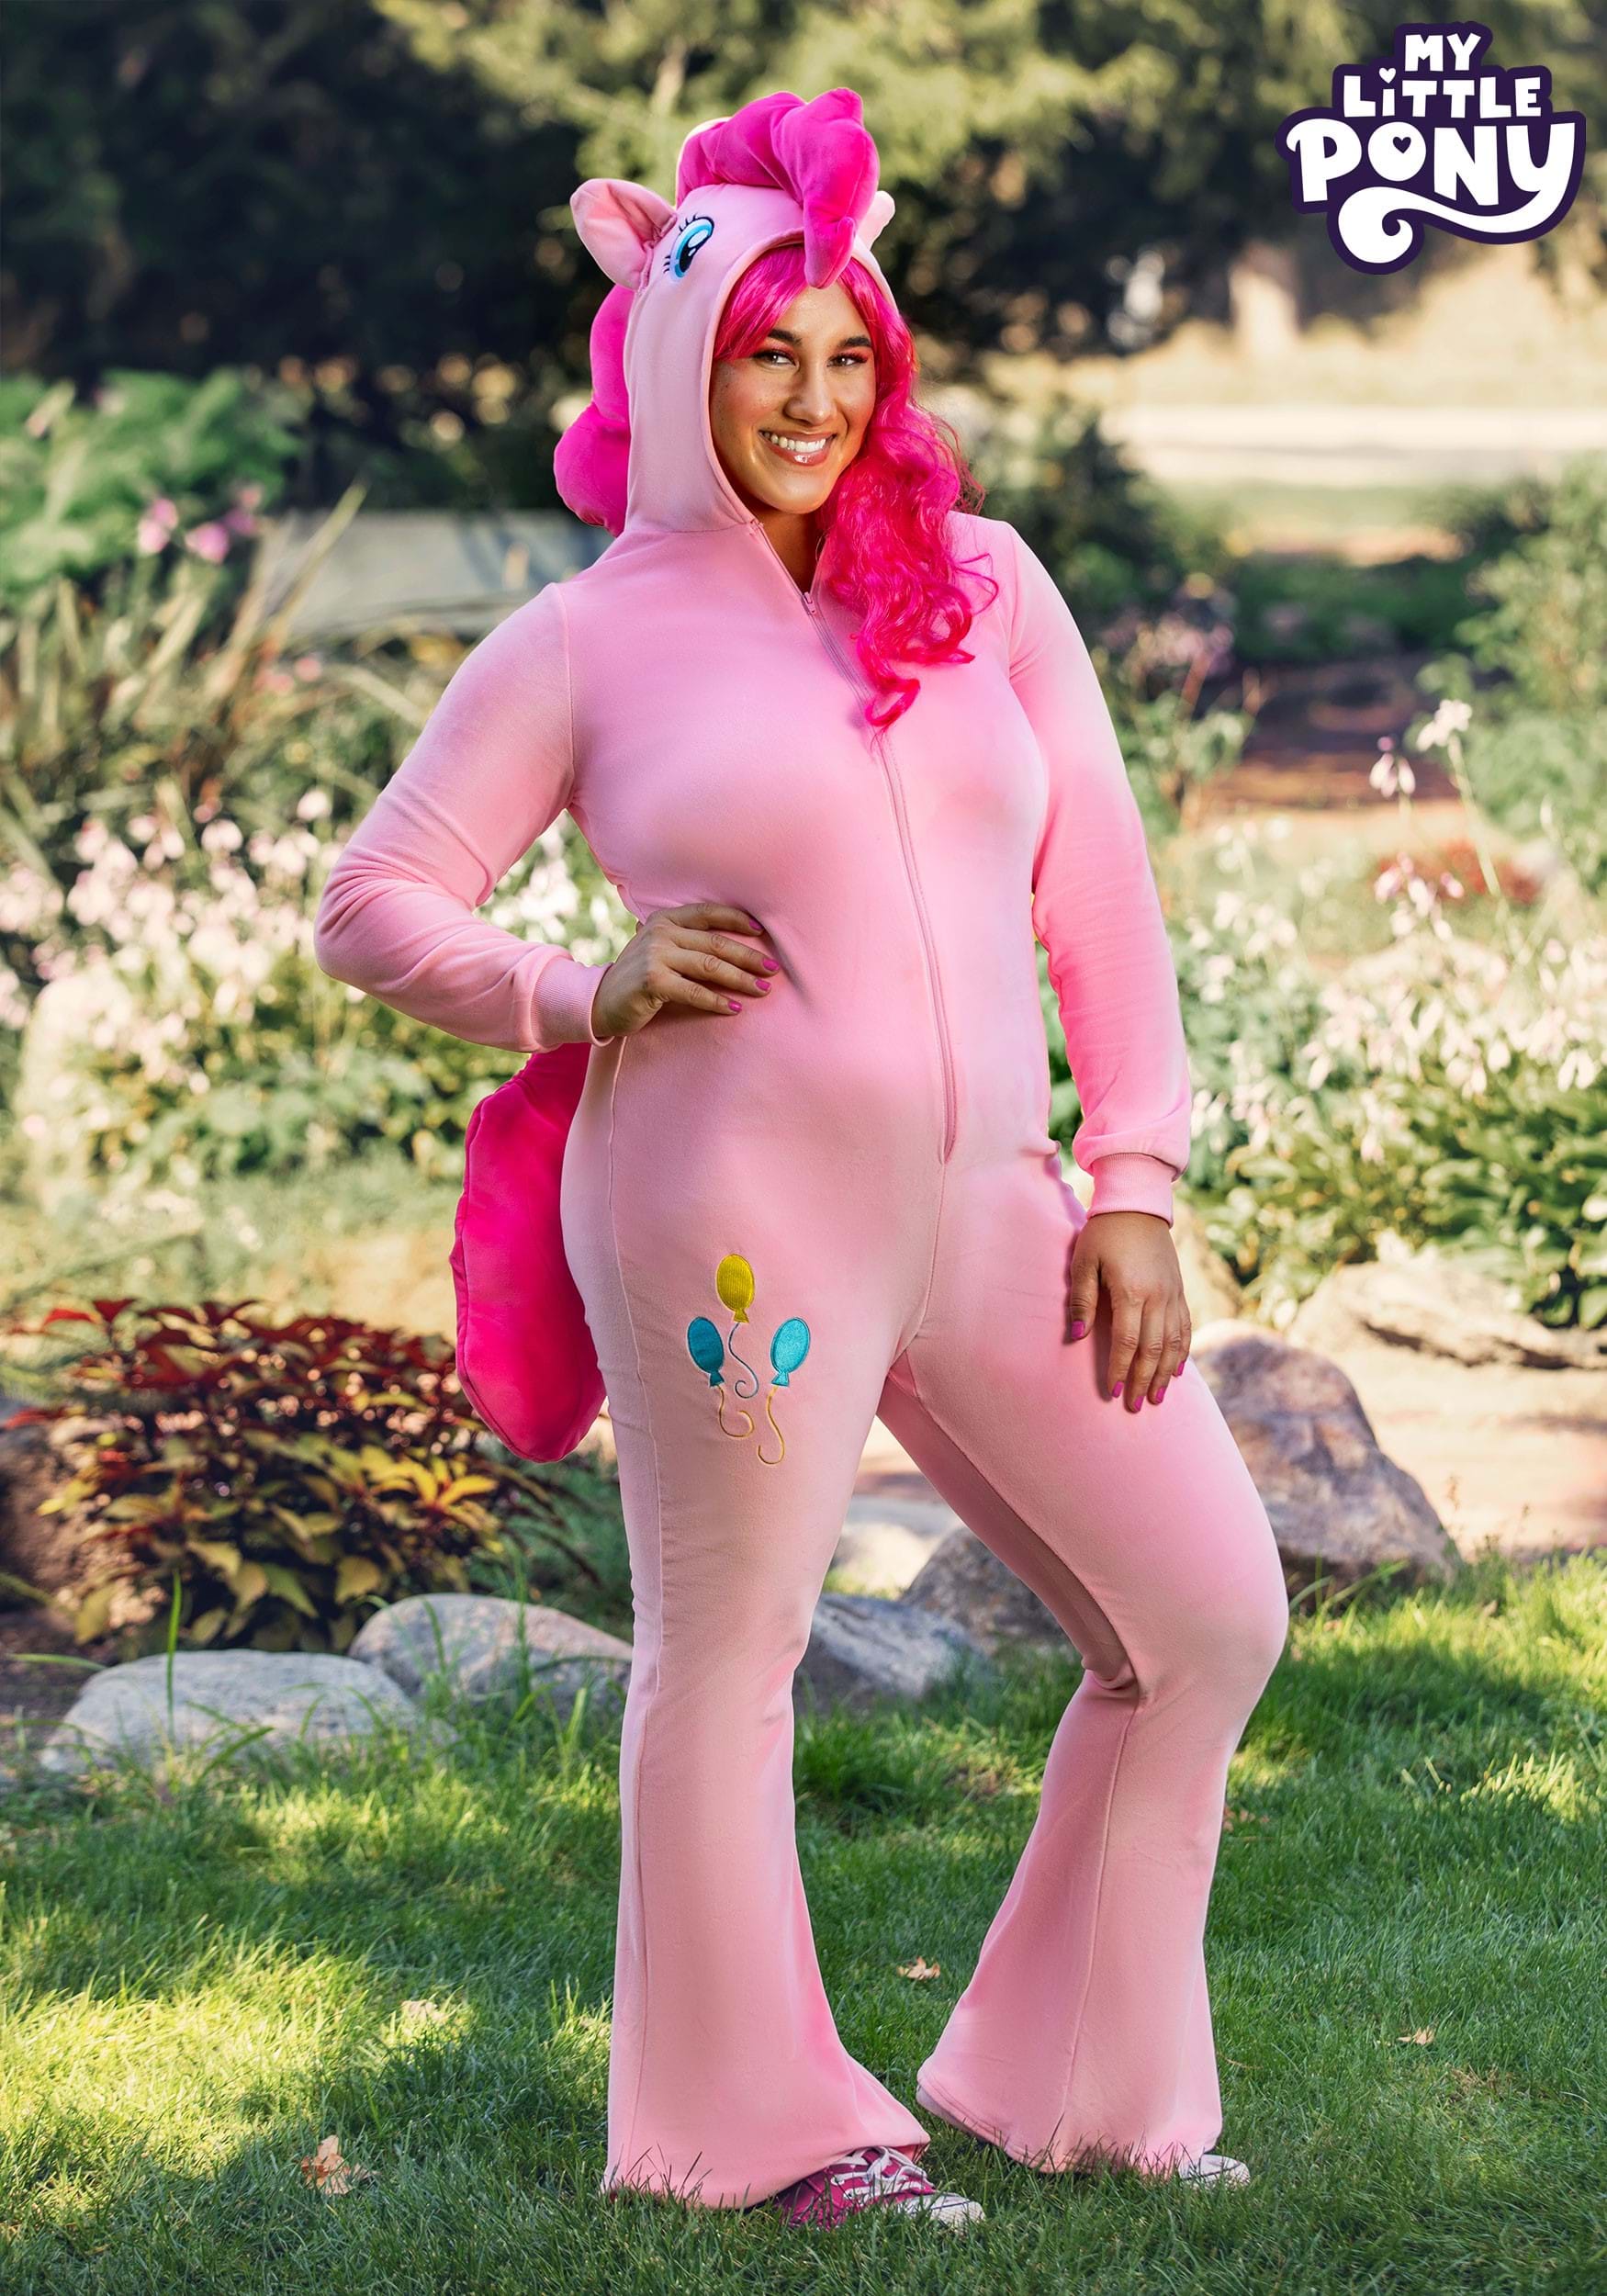 https://images.halloweencostumes.ca/products/69580/1-1/womens-my-little-pony-pinkie-pie-costume.jpg